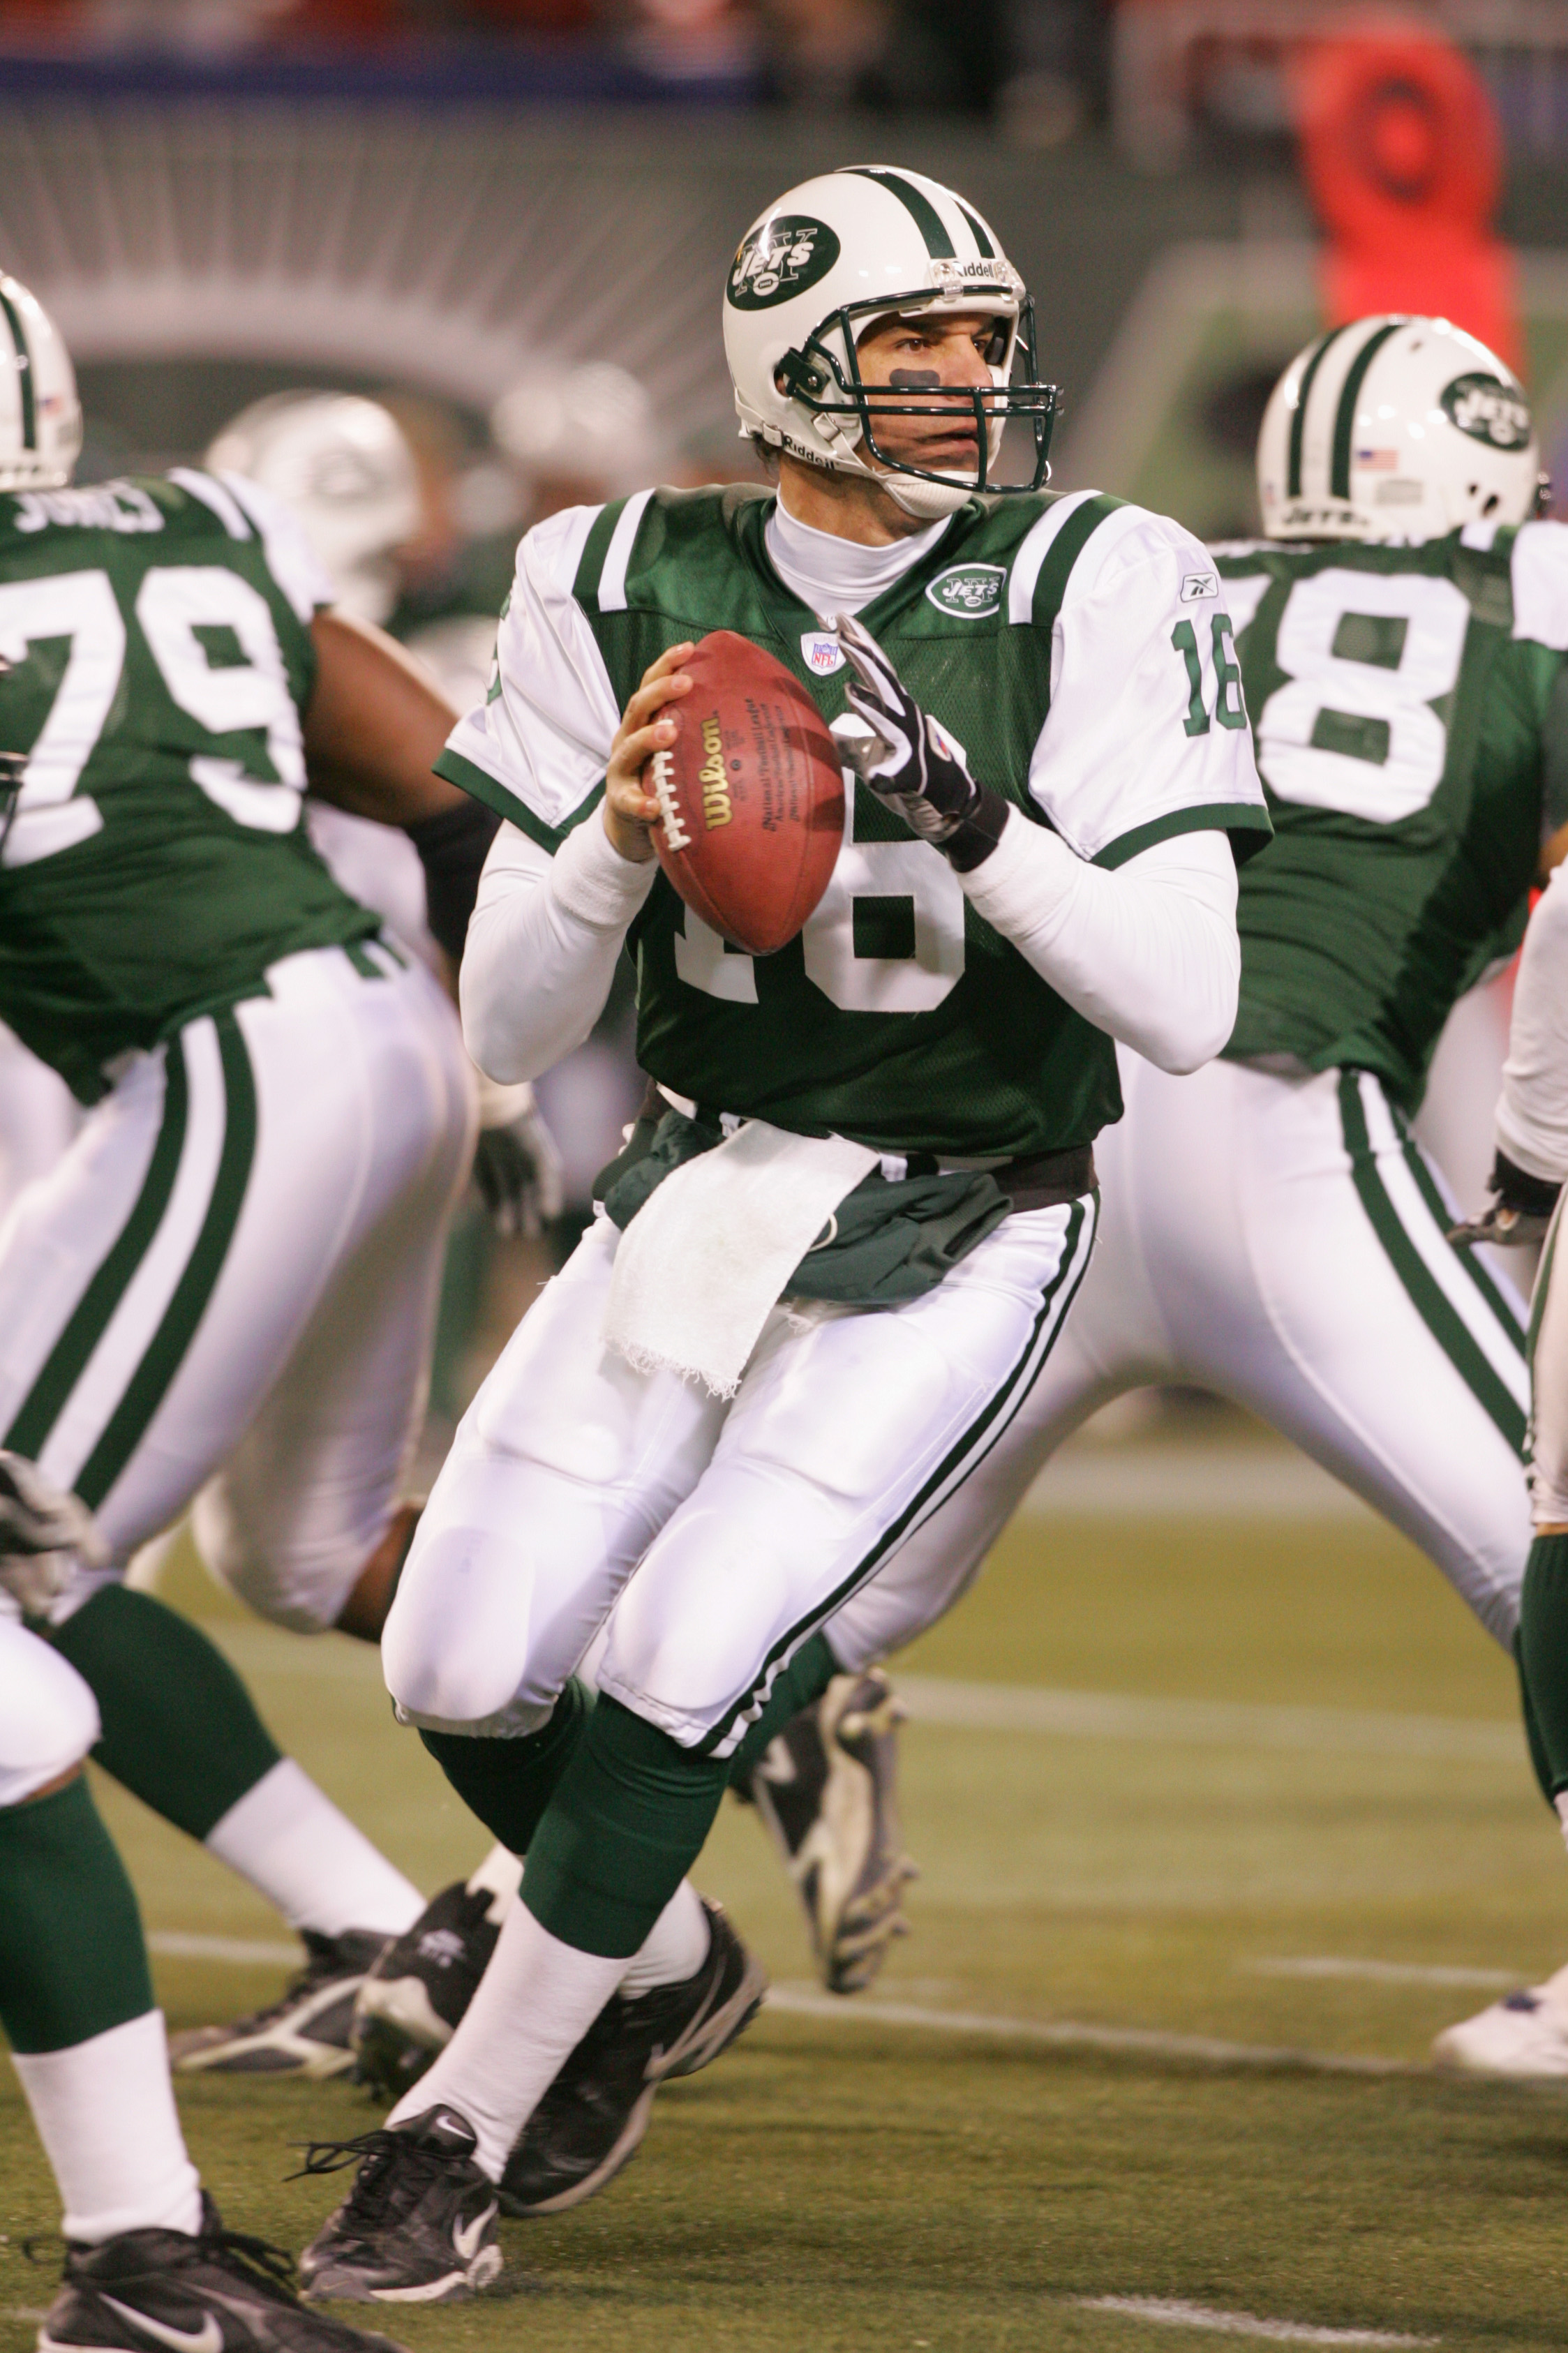 EAST RUTHERFORD, NJ - DECEMBER 26: Quarterback Vinny Testaverde #16 of the New York Jets looks to pass during the game against the New England Patriots on December 26, 2005 at Giants Stadium in East Rutherford, New Jersey.The Patriots defeated the Jets 31